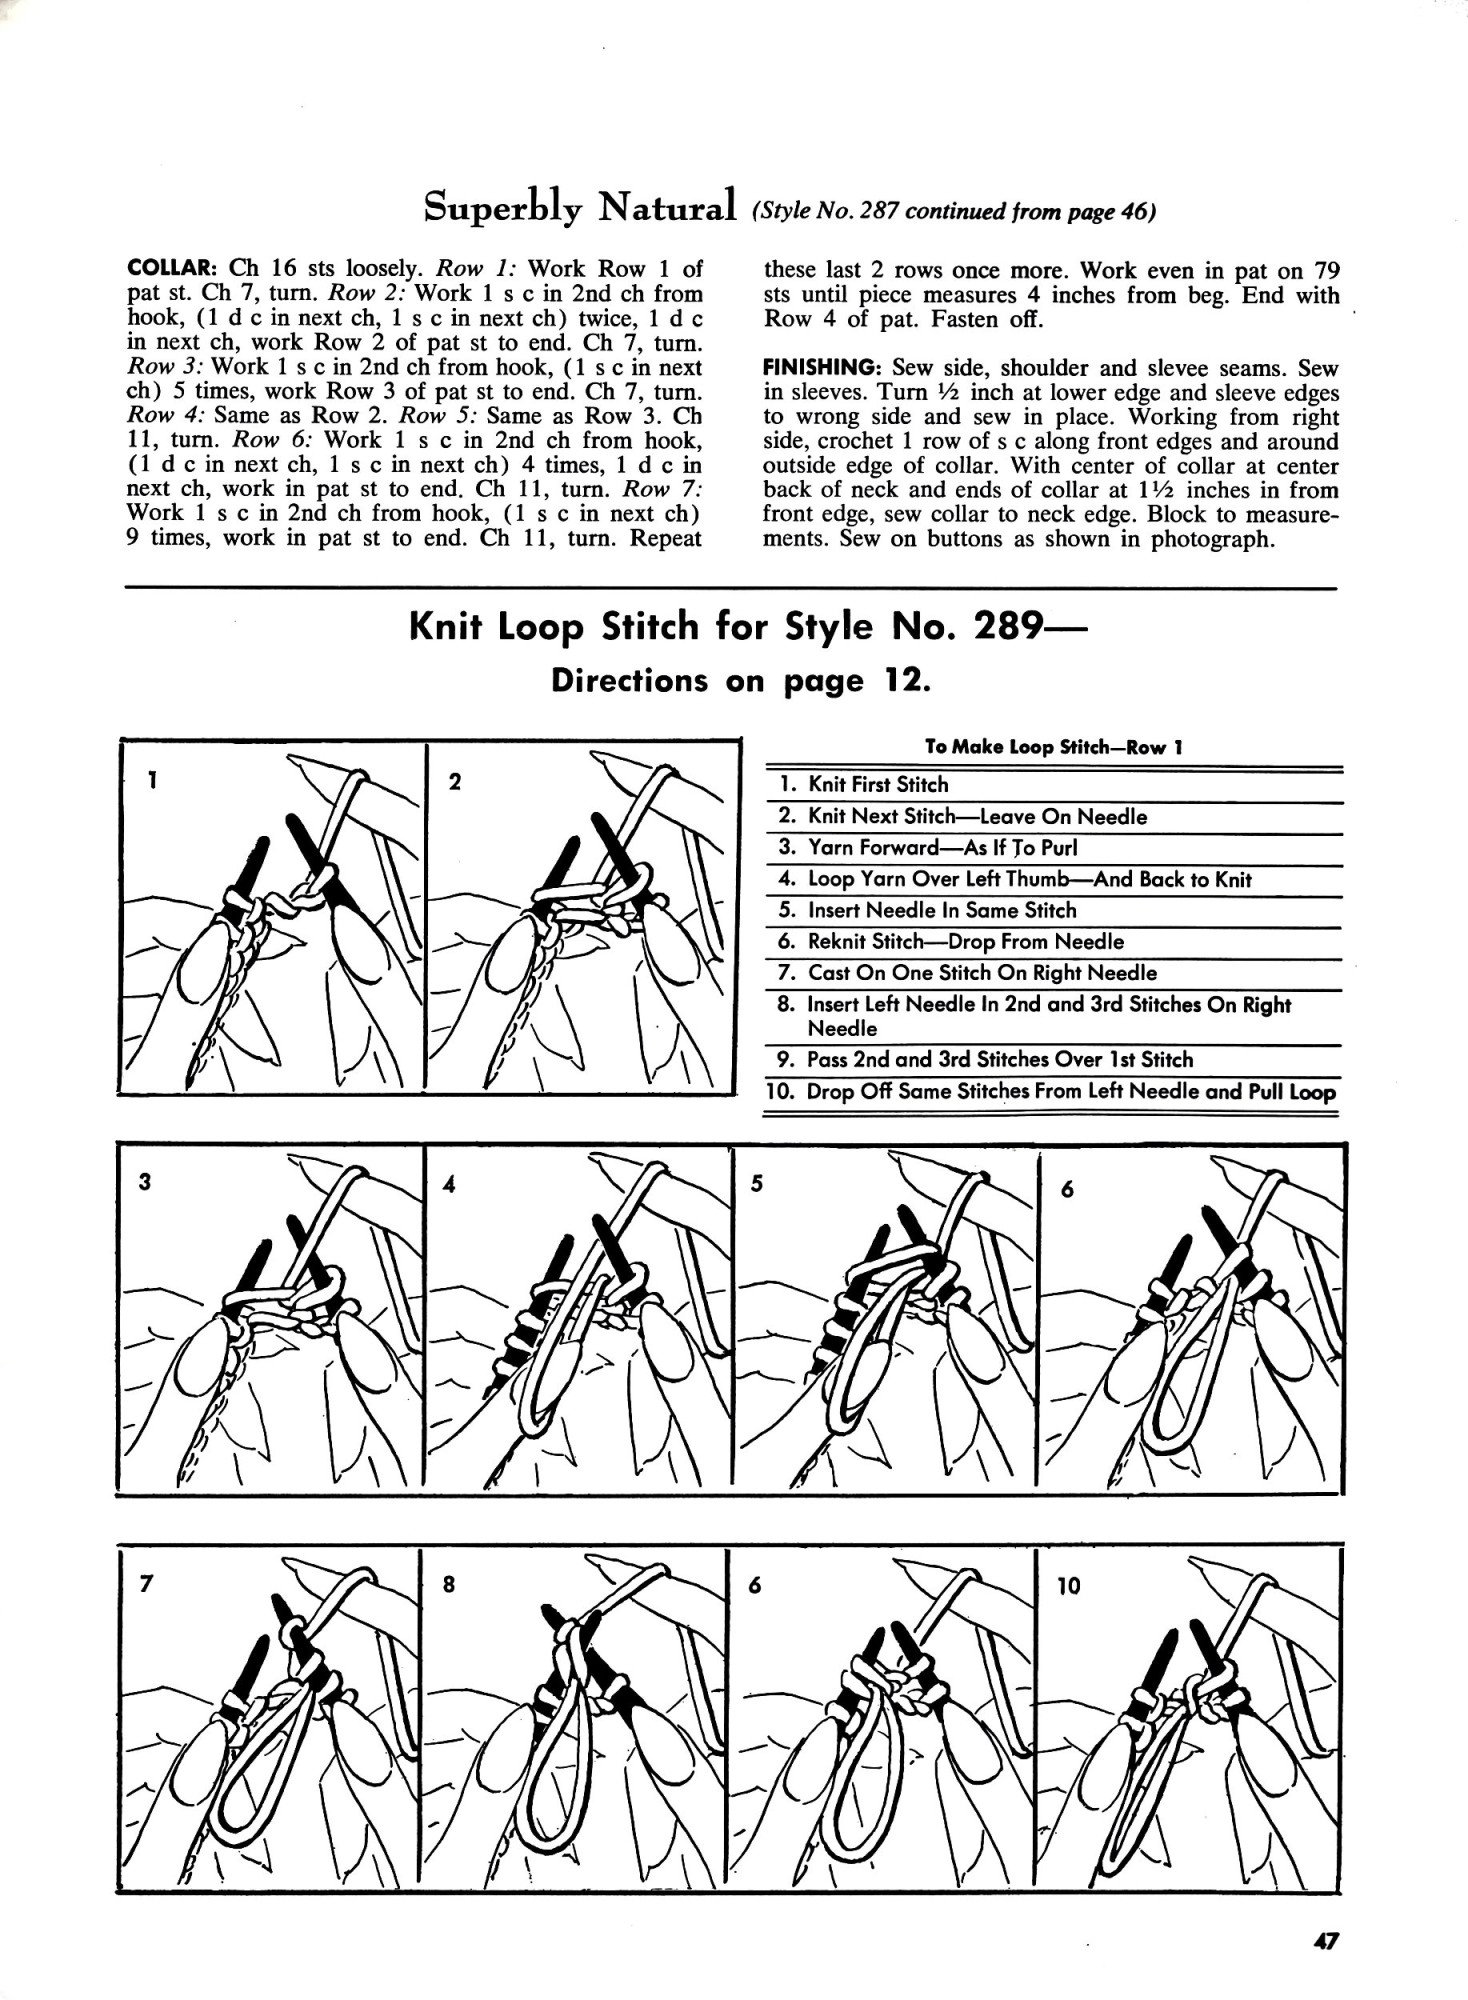 How to Knit the Loop Stitch for Style No. 289